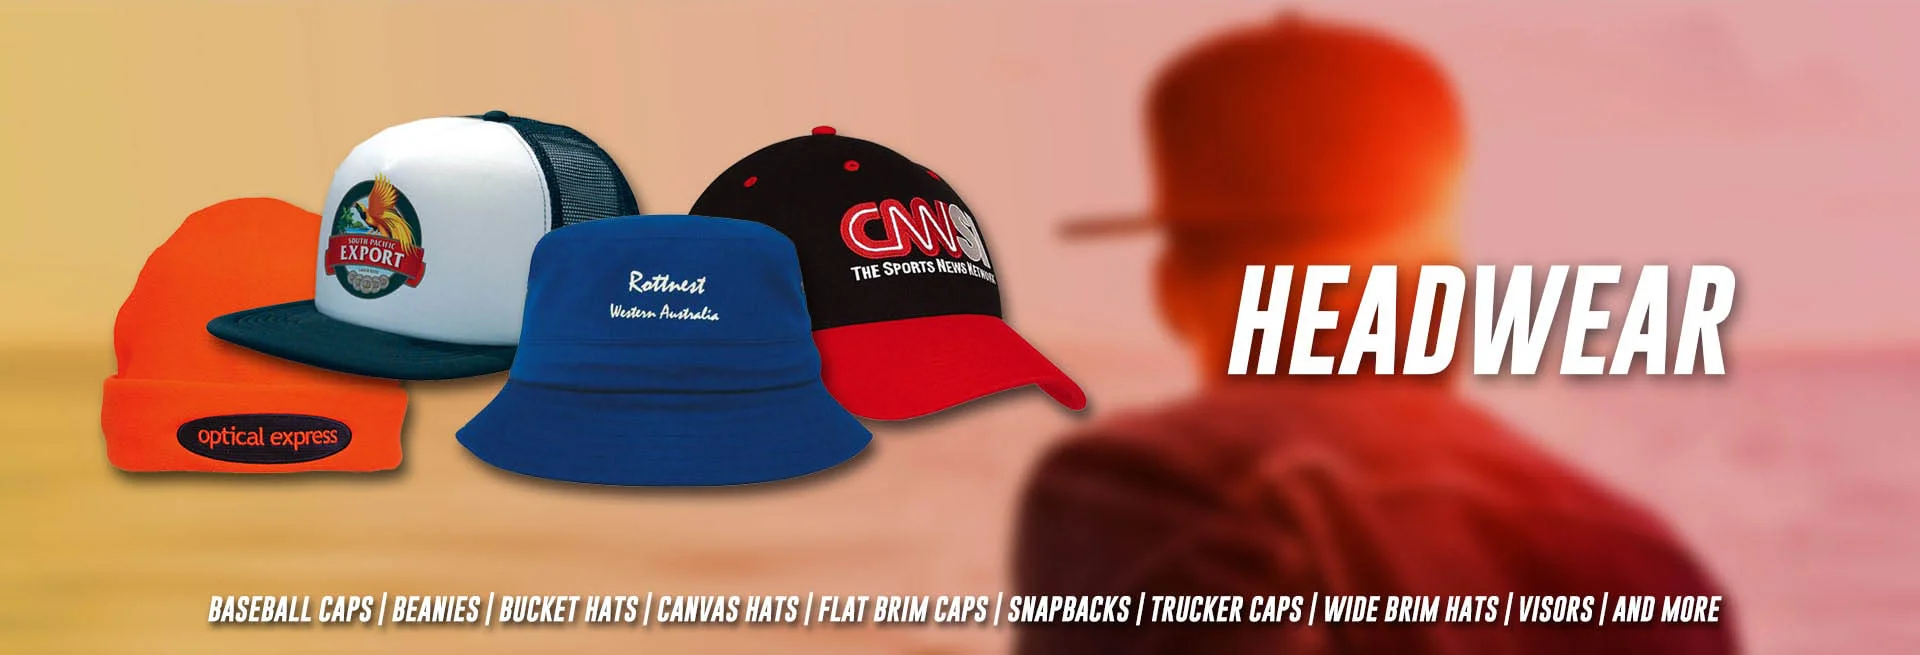 Custom Headwears Online in Perth - Mad Dog Promotions